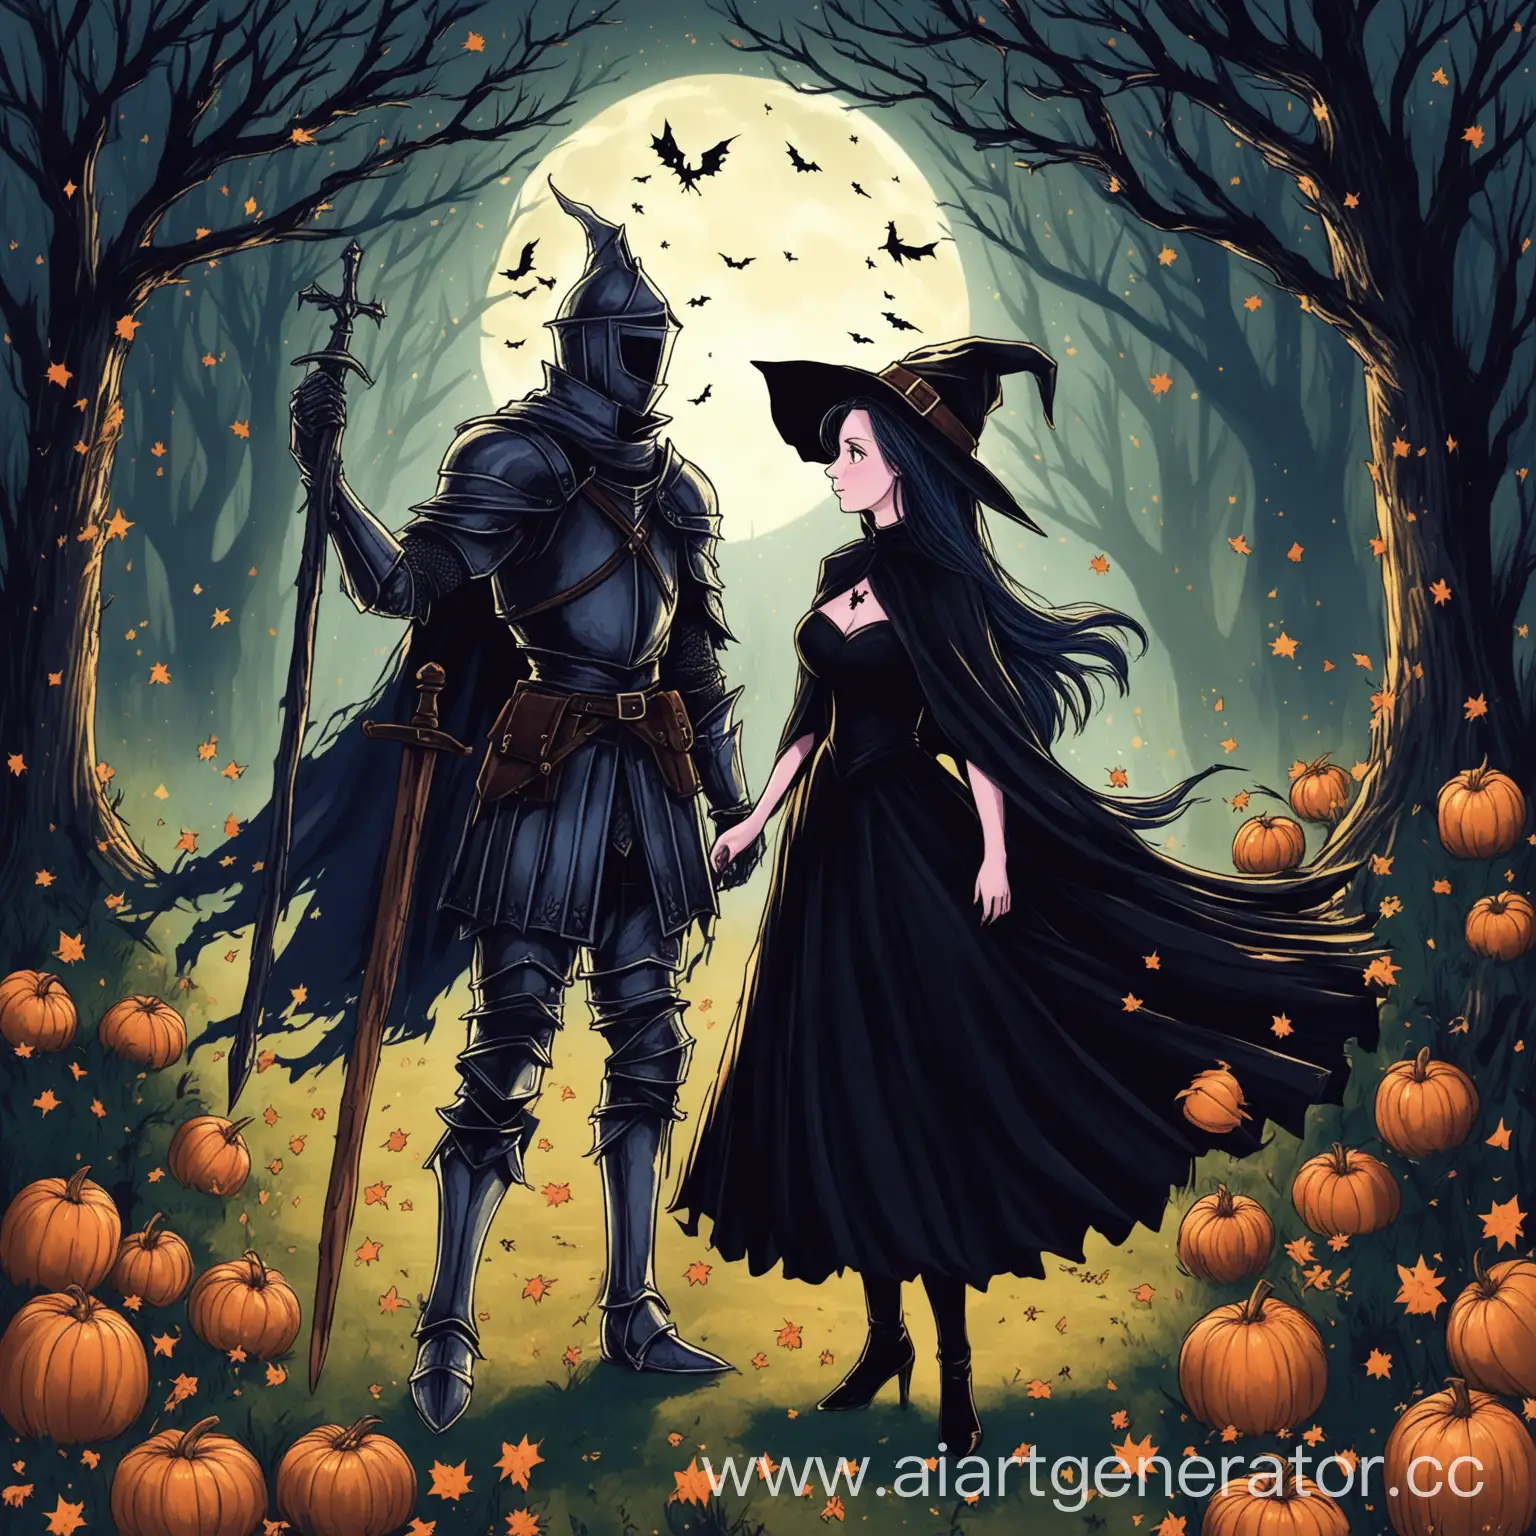 Fantasy-Encounter-Witch-Confronts-Knight-in-Moonlit-Forest